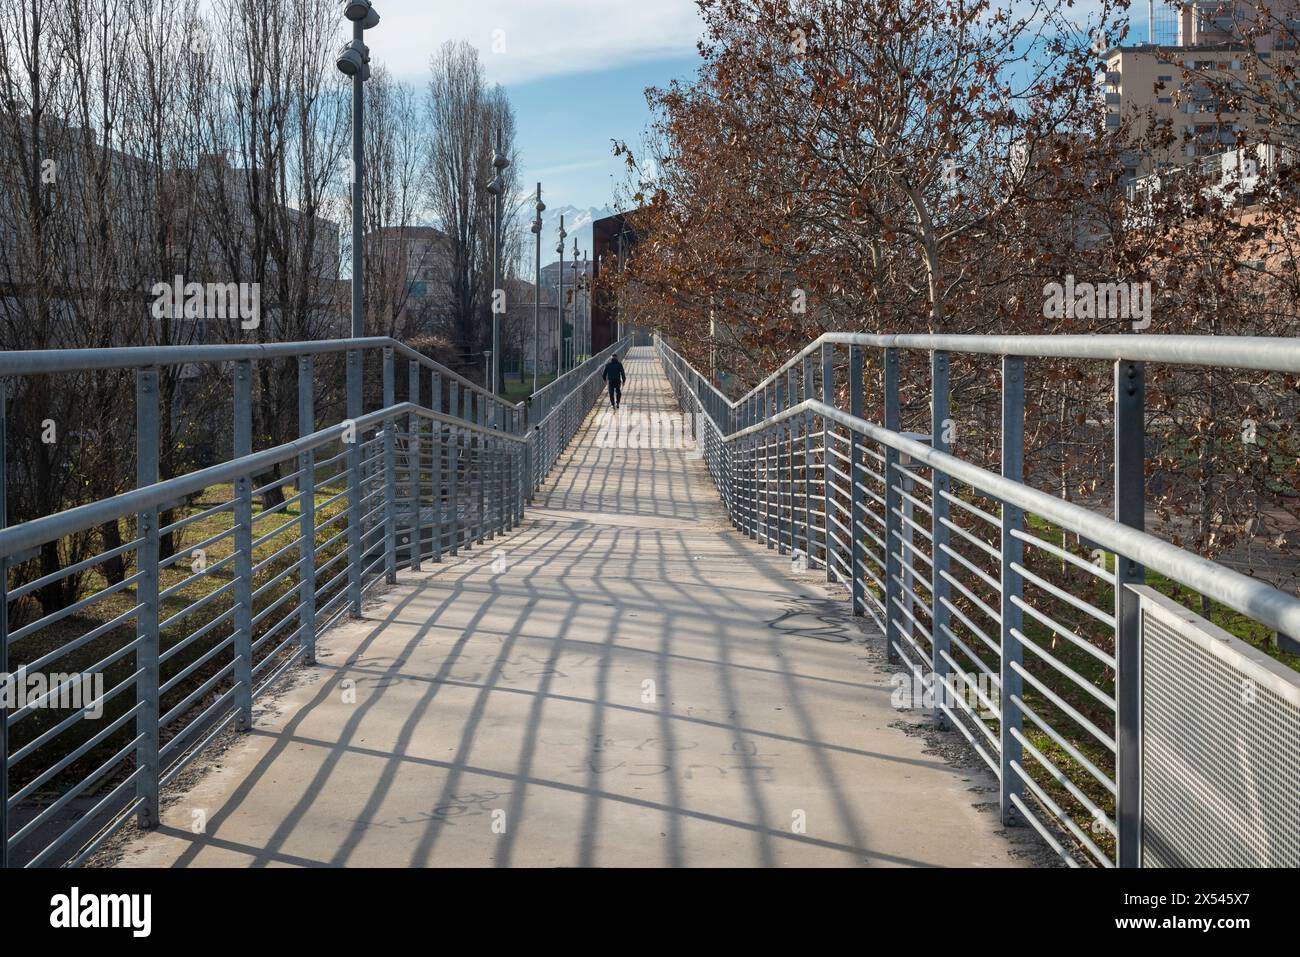 Infinity perspective of pedestrian walkway at Dora park in Turin, Italy. Stock Photo